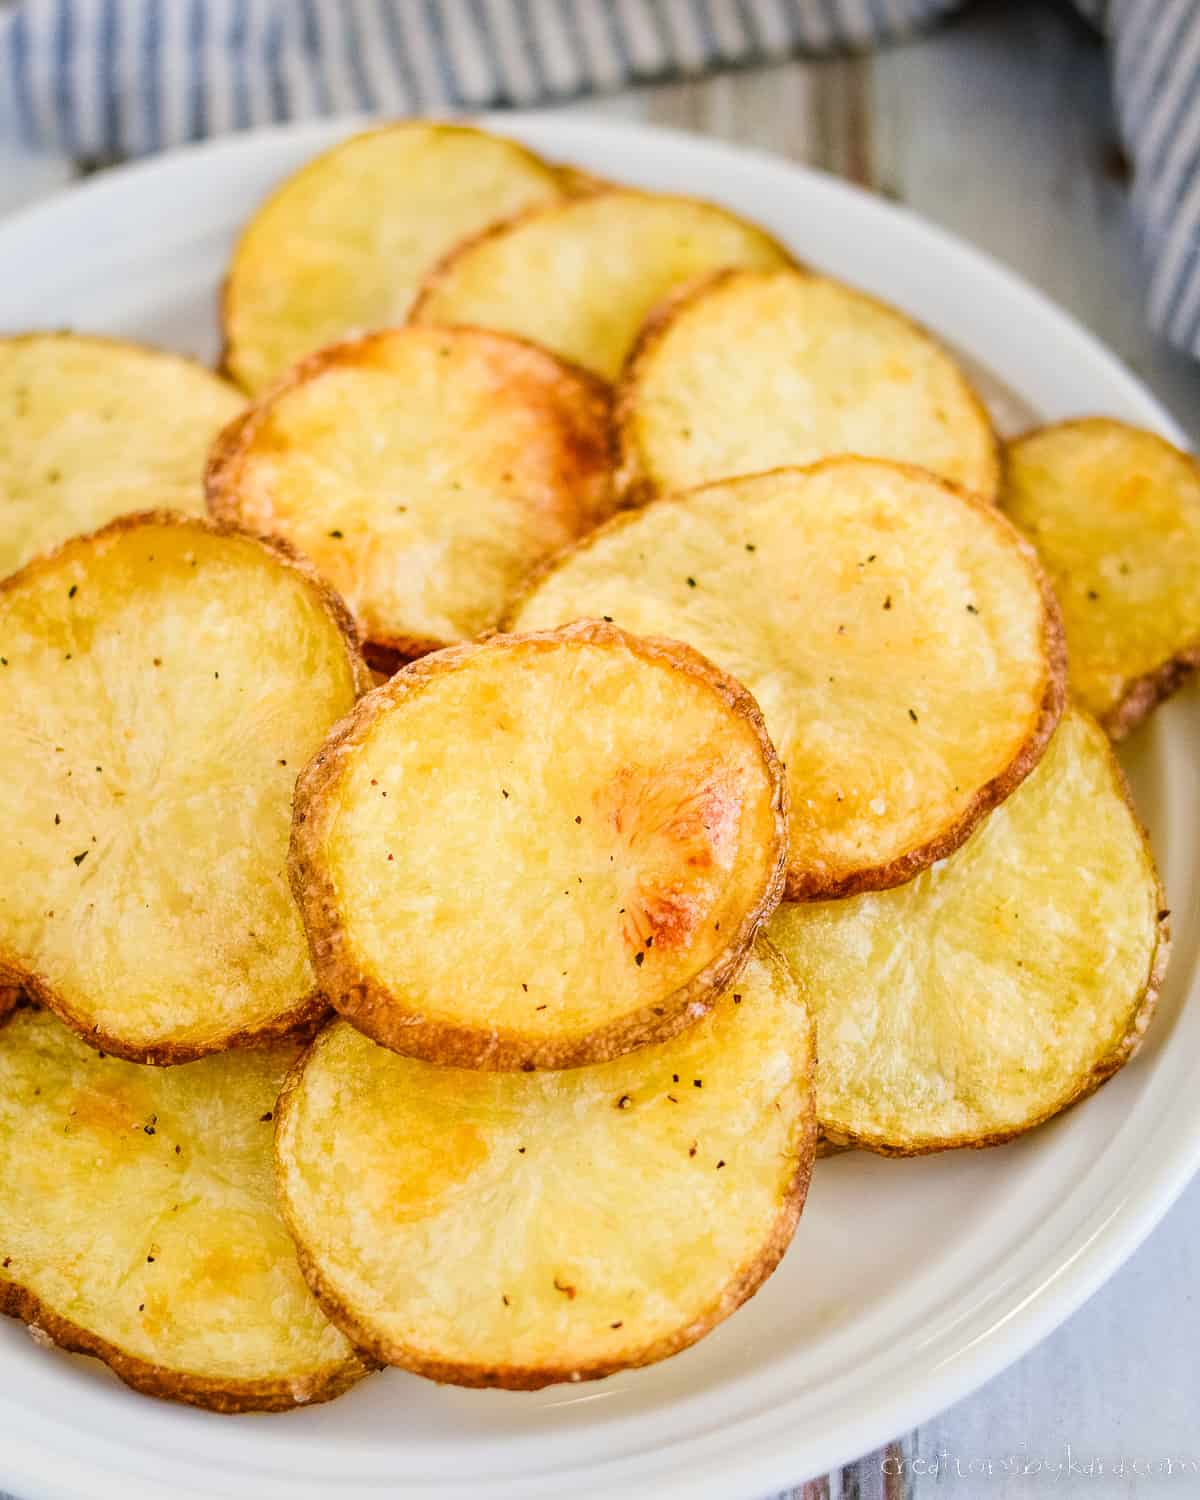 Baked Potato Slices - Cook2eatwell